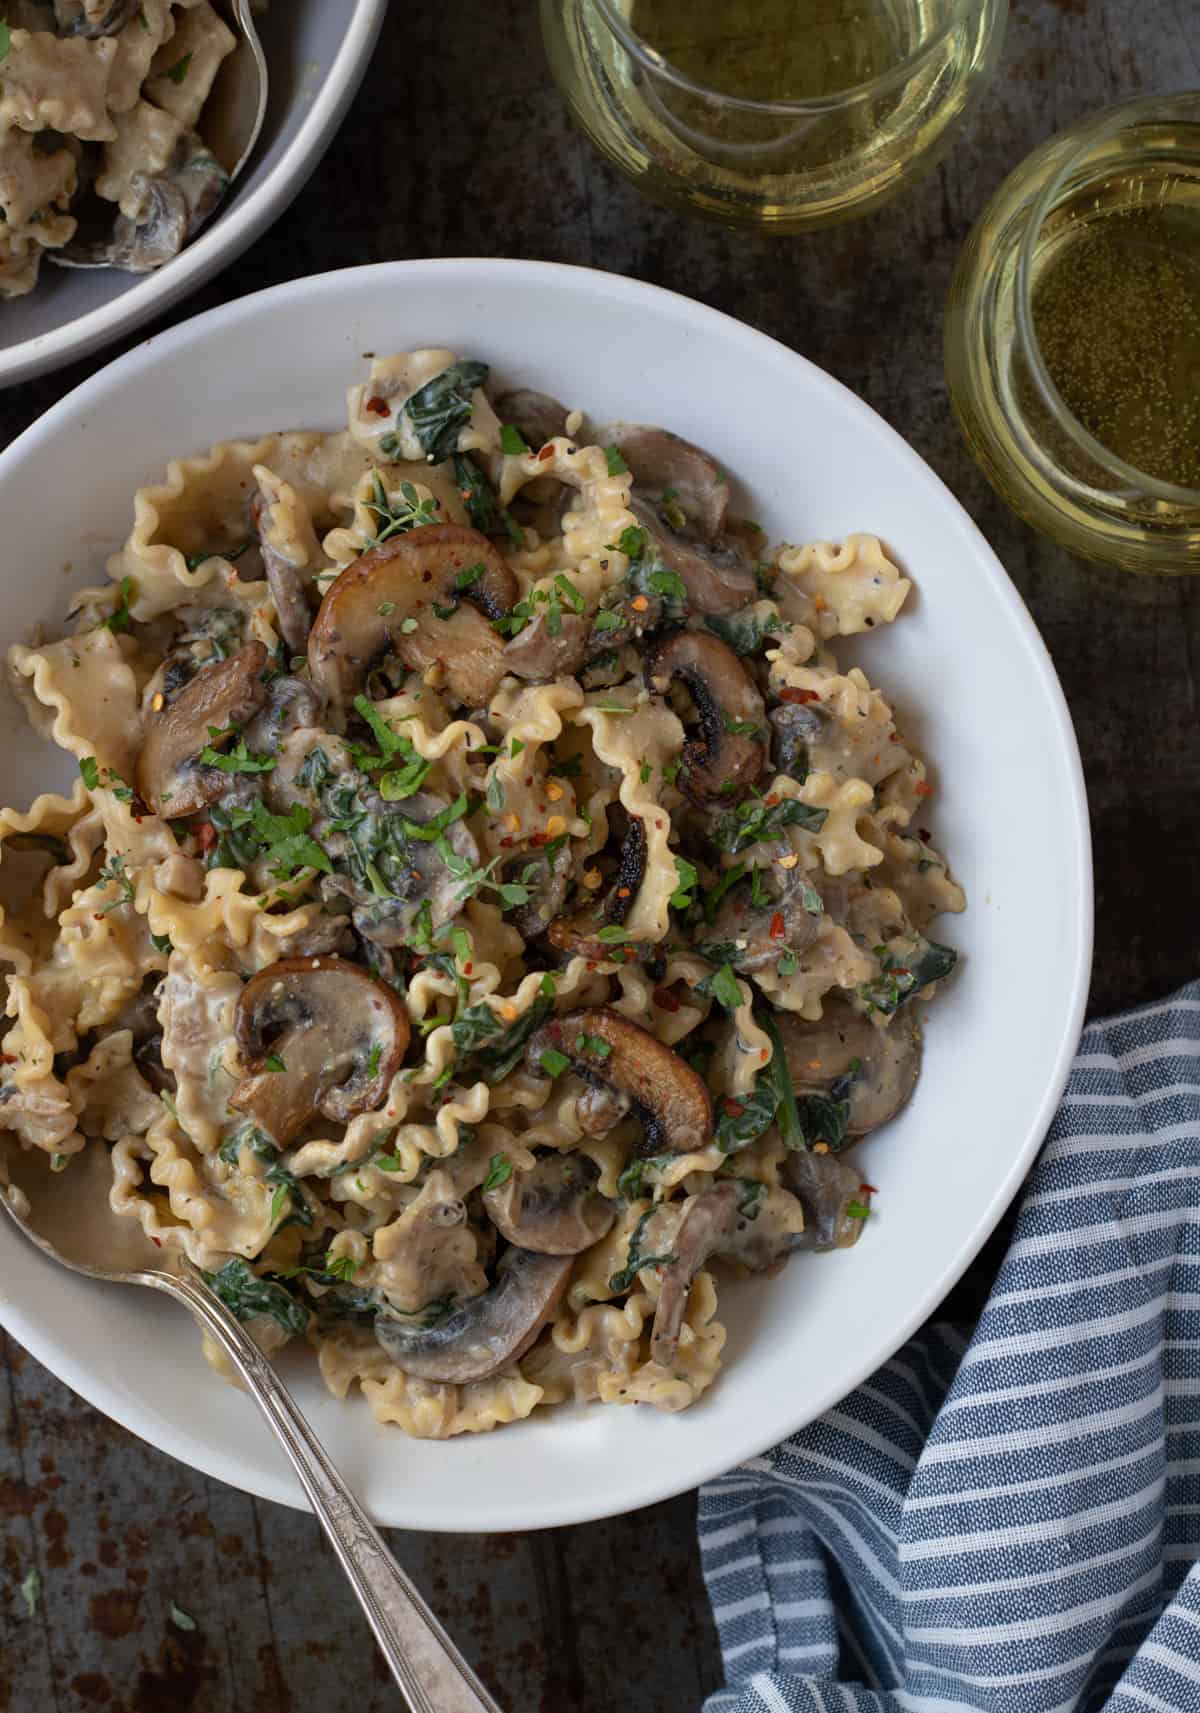 Bowlful of creamy mushroom and spinach pasta at a table setting with white wine.